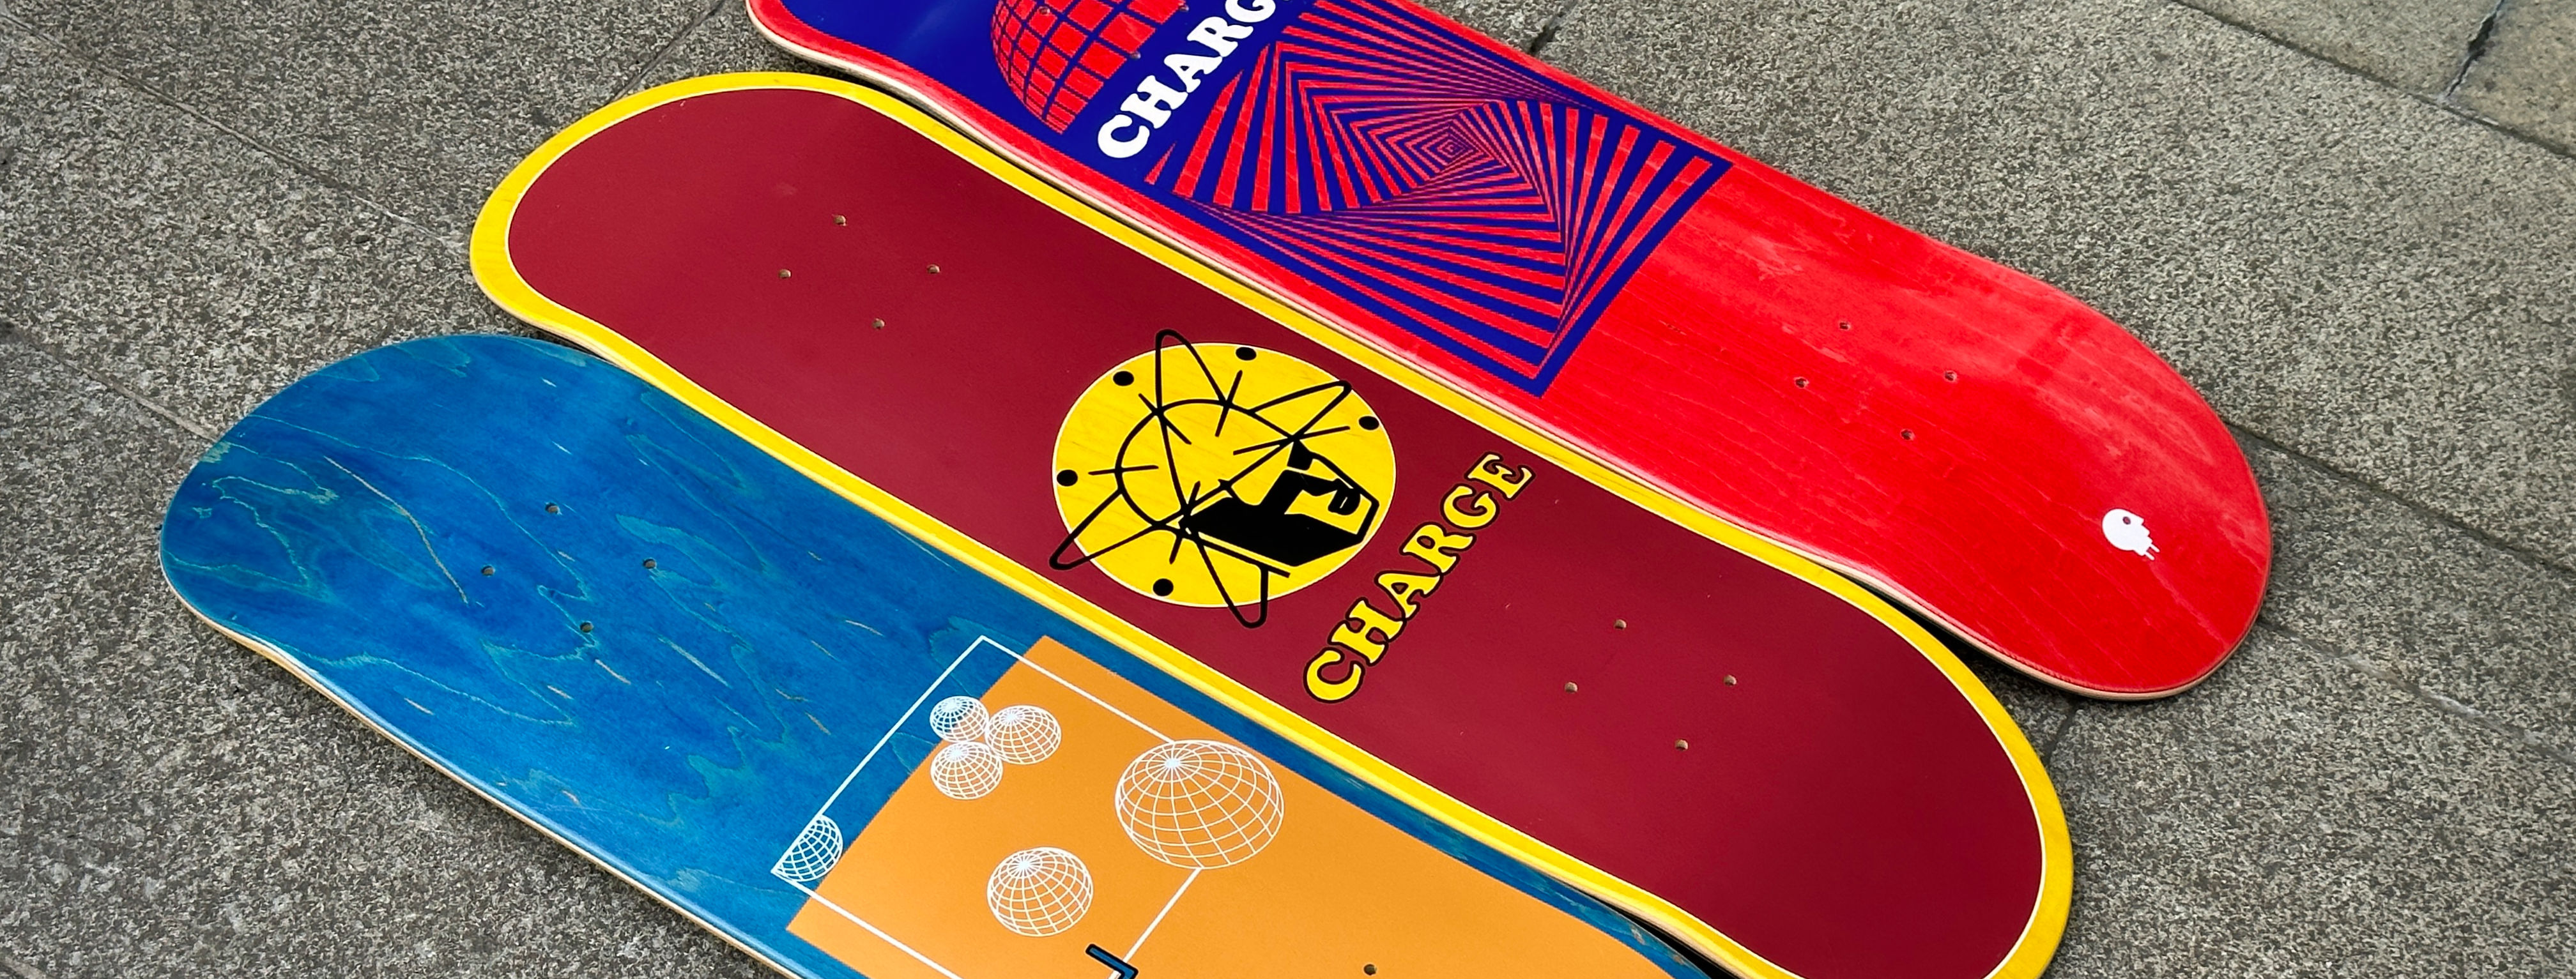 Charge skateboards